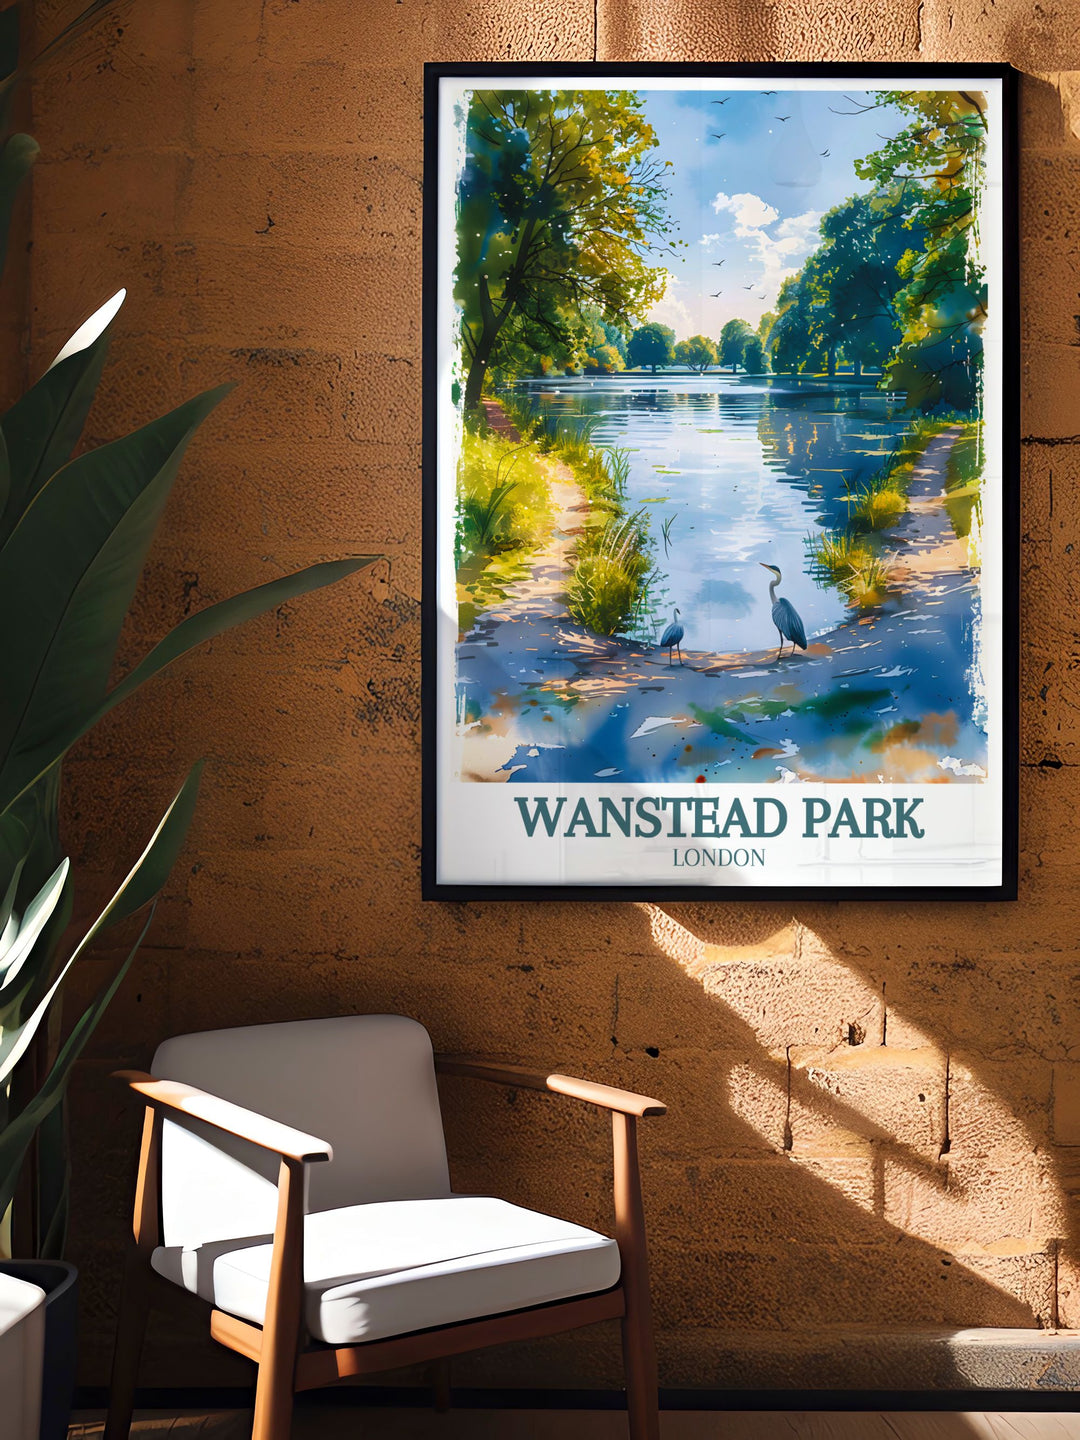 Wanstead Park travel poster capturing the parks lush greenery and peaceful environment. A must have for anyone who loves East Londons natural beauty and wants to incorporate it into their home decor.